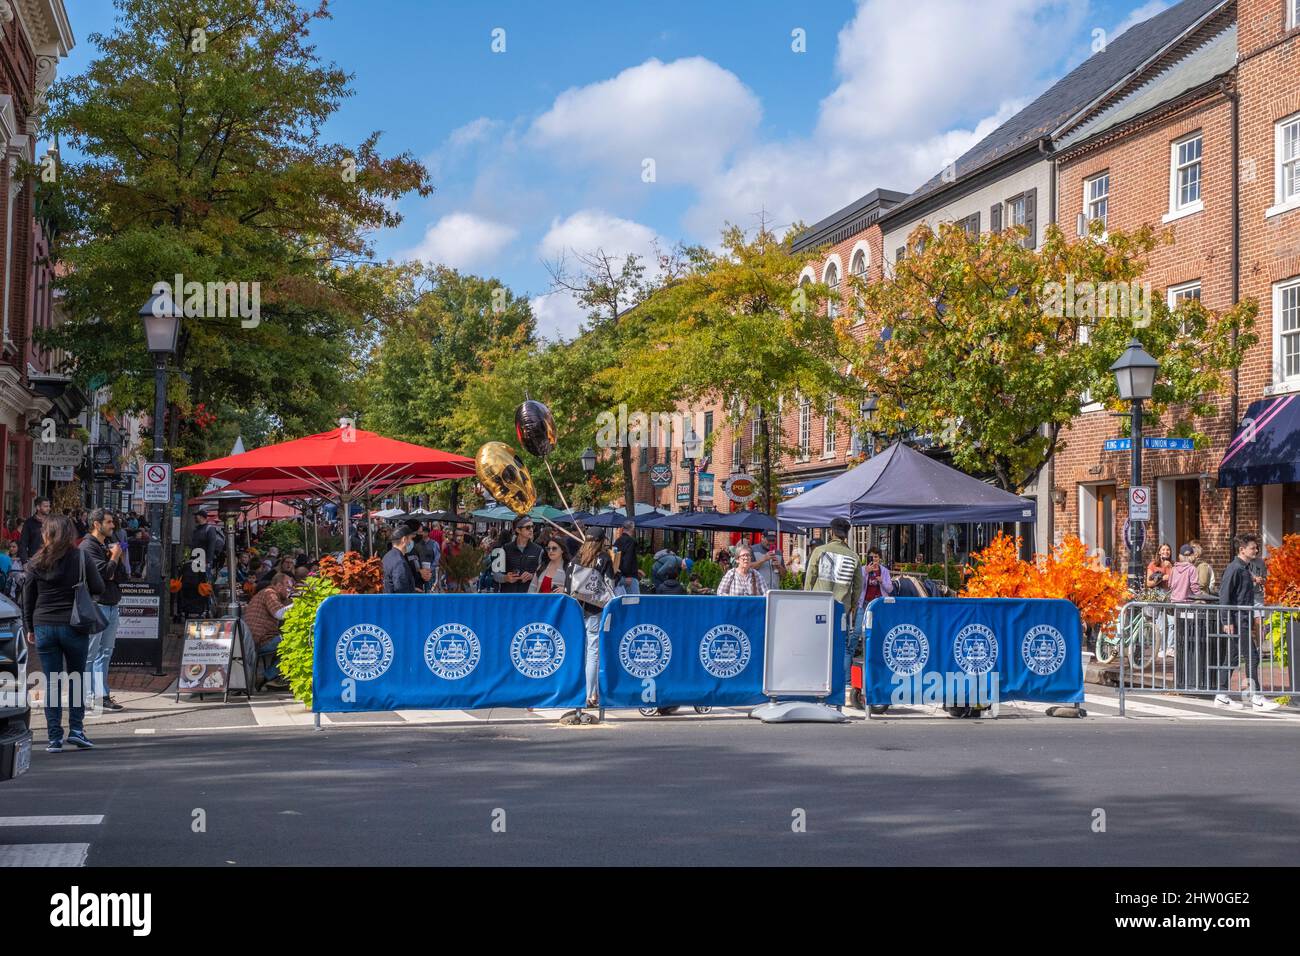 Alexandria, Virginia. King Street becomes Pedestrian Walkway during COVID Pandemic, to allow Curbside Dining. Stock Photo